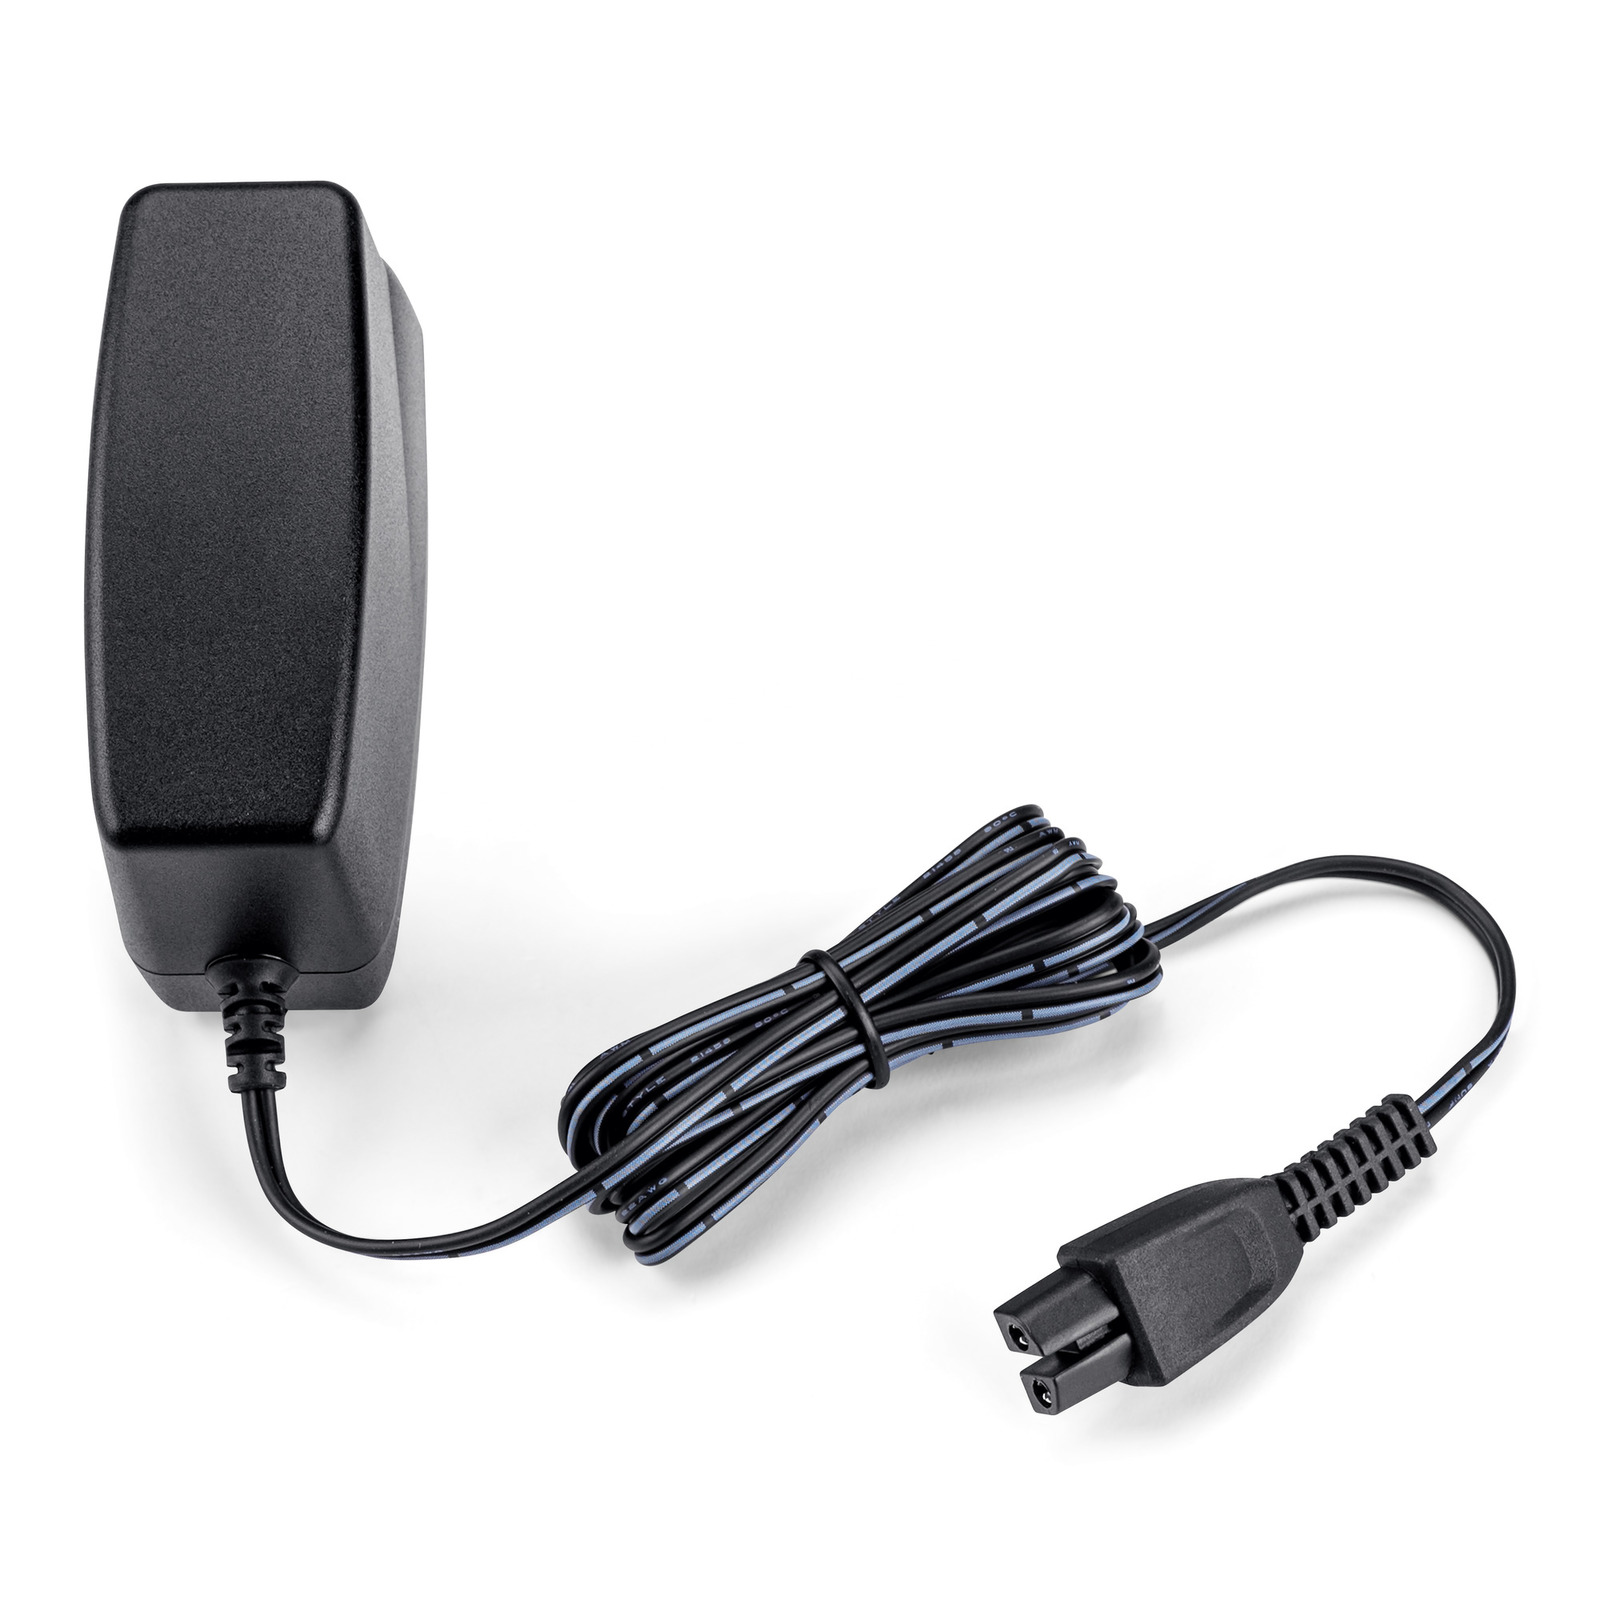 Replacement Wall Charger for FC 5 Cordless, FC 7, and FC 7 Premium